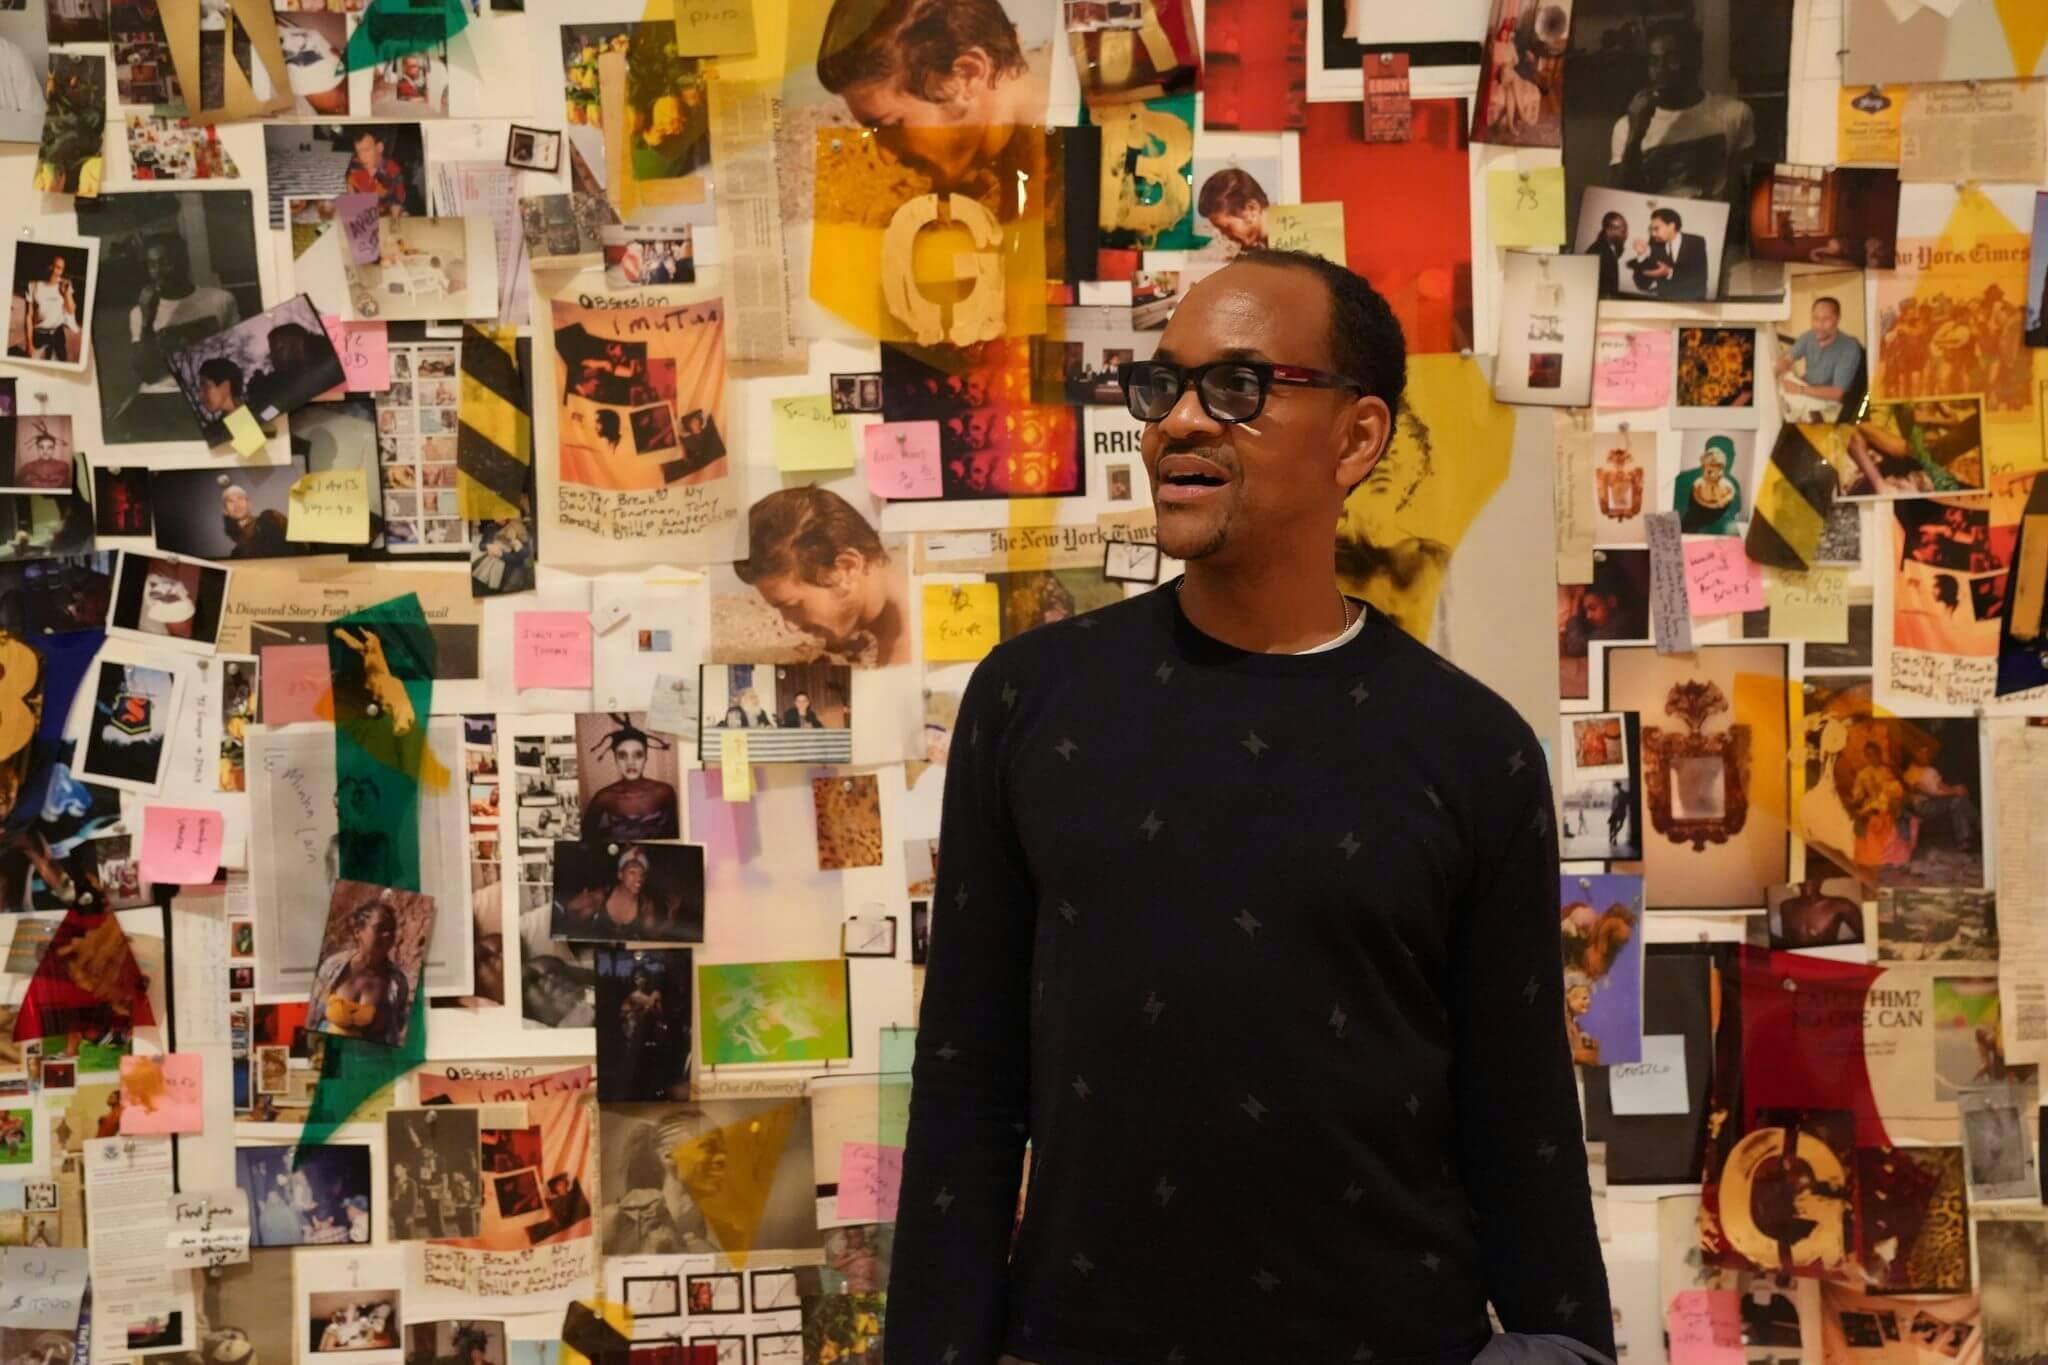 Lyle Ashton Harris wears a black shirt and glasses, standing in front of a wall of colorful images.